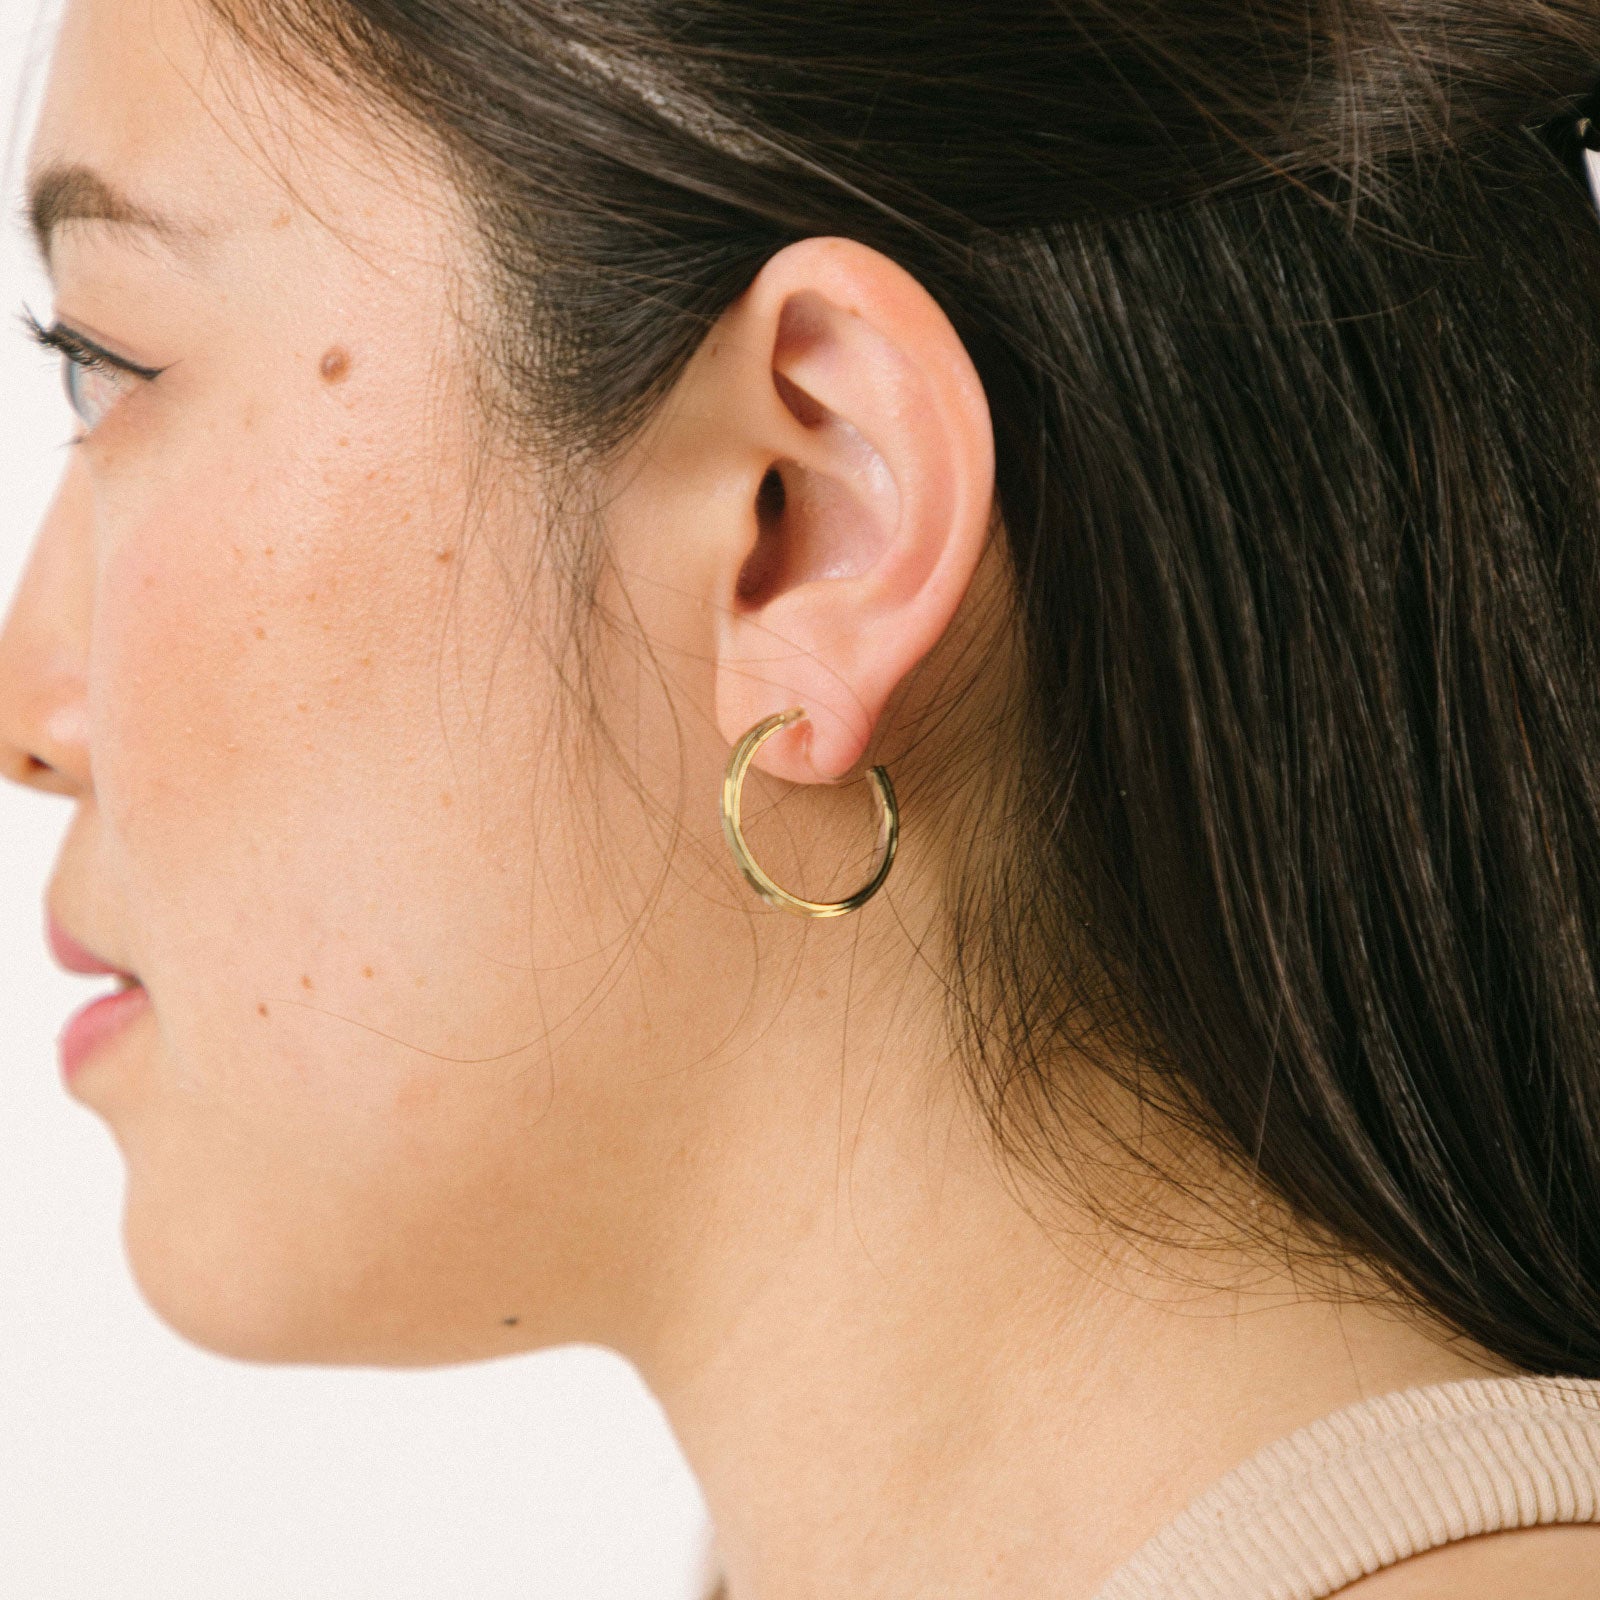 A model wearing the Gold Cassie Hoop Clip-On Earrings feature a resin closure, making them ideal for all ear types, including thick/large ears, sensitive ears, small/thin ears, and stretched/healing ears. On average, pairs are comfortably worn for 8-12 hours with a medium secure hold, and they are not adjustable. This item is sold as a single pair and is also available in Silver. The earrings are constructed with gold-tone metal alloy.